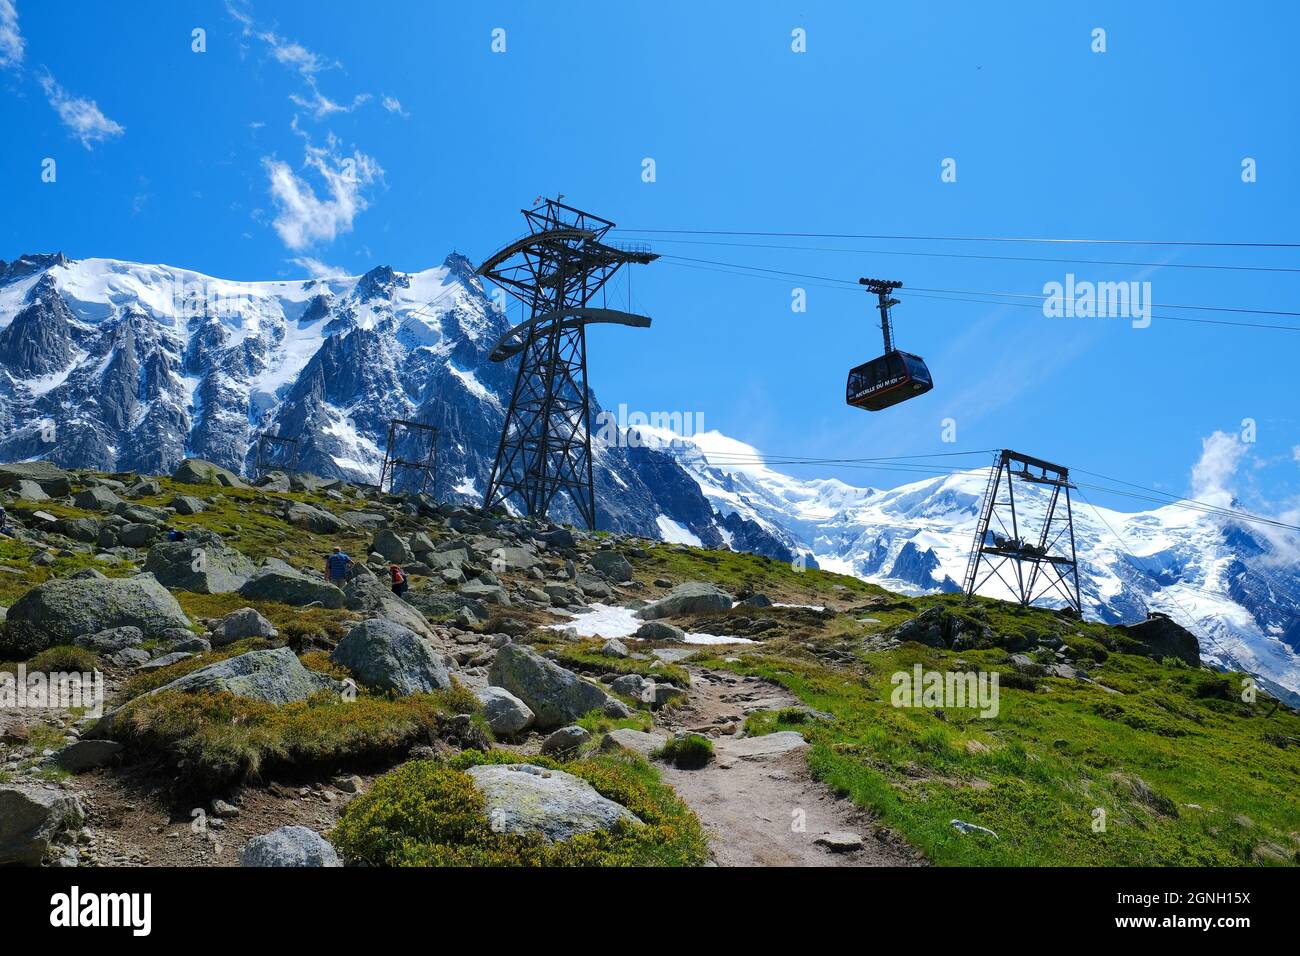 Chamonix, France - July 10, 2021. Cable car coach going to the Aiguille du Midi 3842 m mountain in the Mont Blanc massif , Chamonix, French Alps Stock Photo